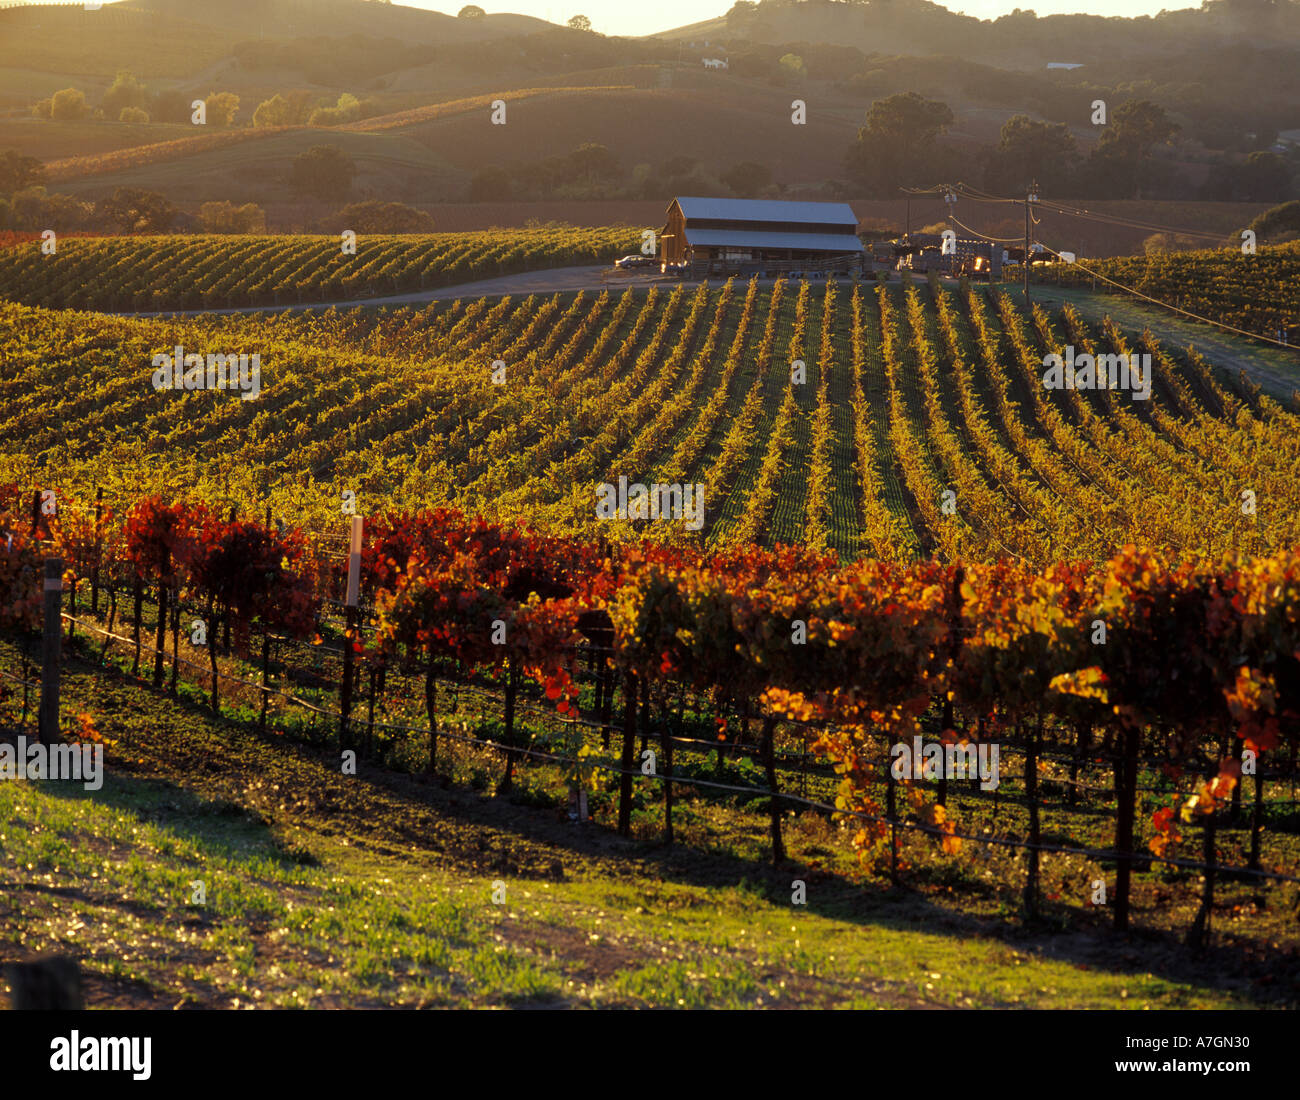 USA, California, Napa Valley, Carneros Ava. Afternoon light skims over hillsides and fall colors of the vineyard. Stock Photo